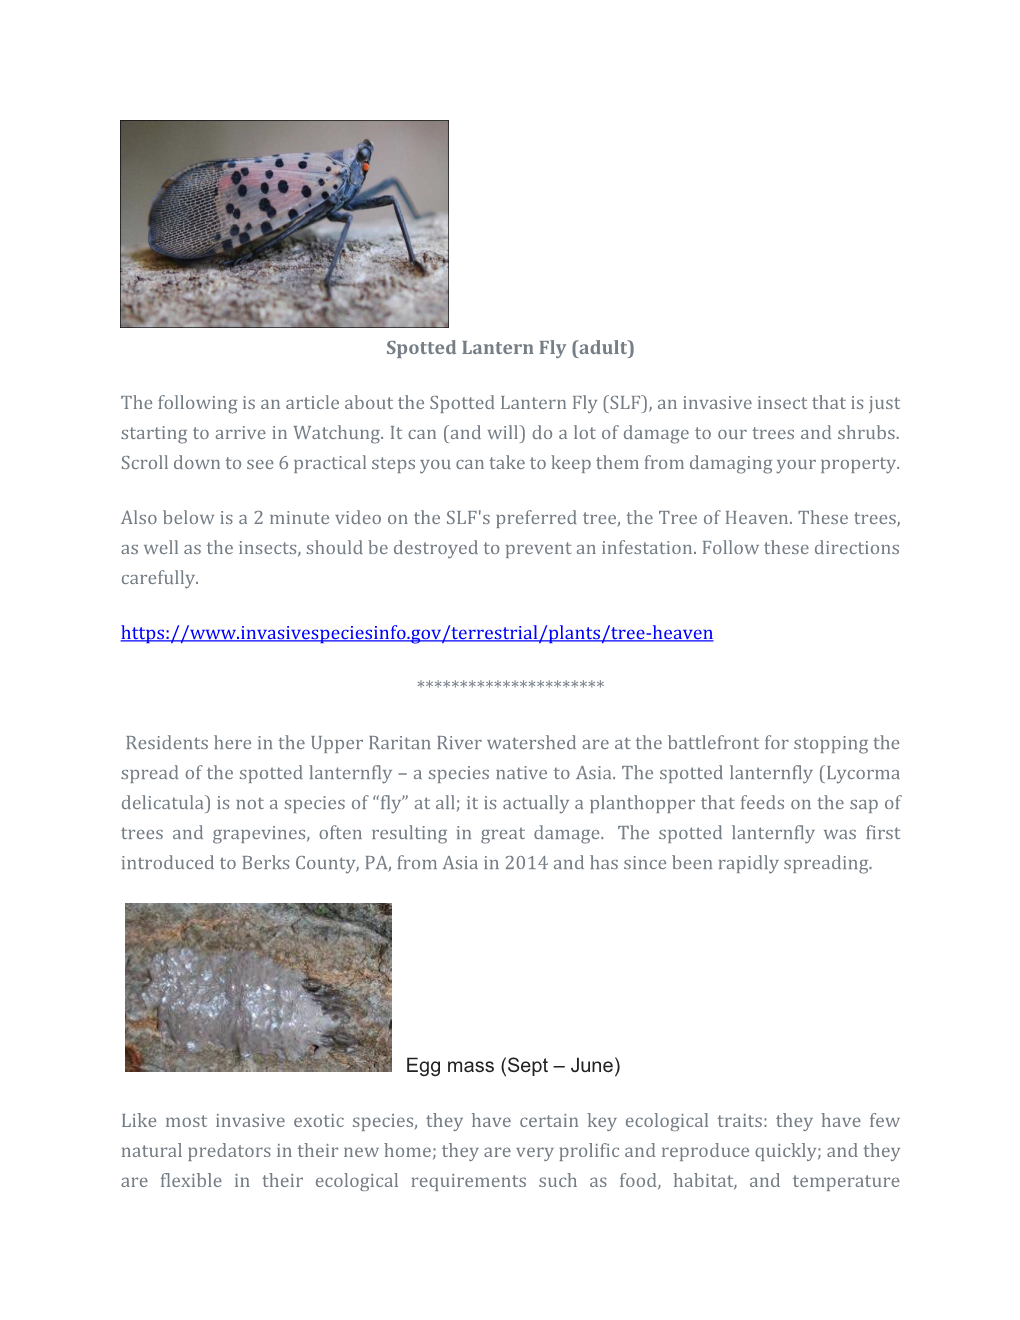 Adult) the Following Is an Article About the Spotted Lantern Fly (SLF